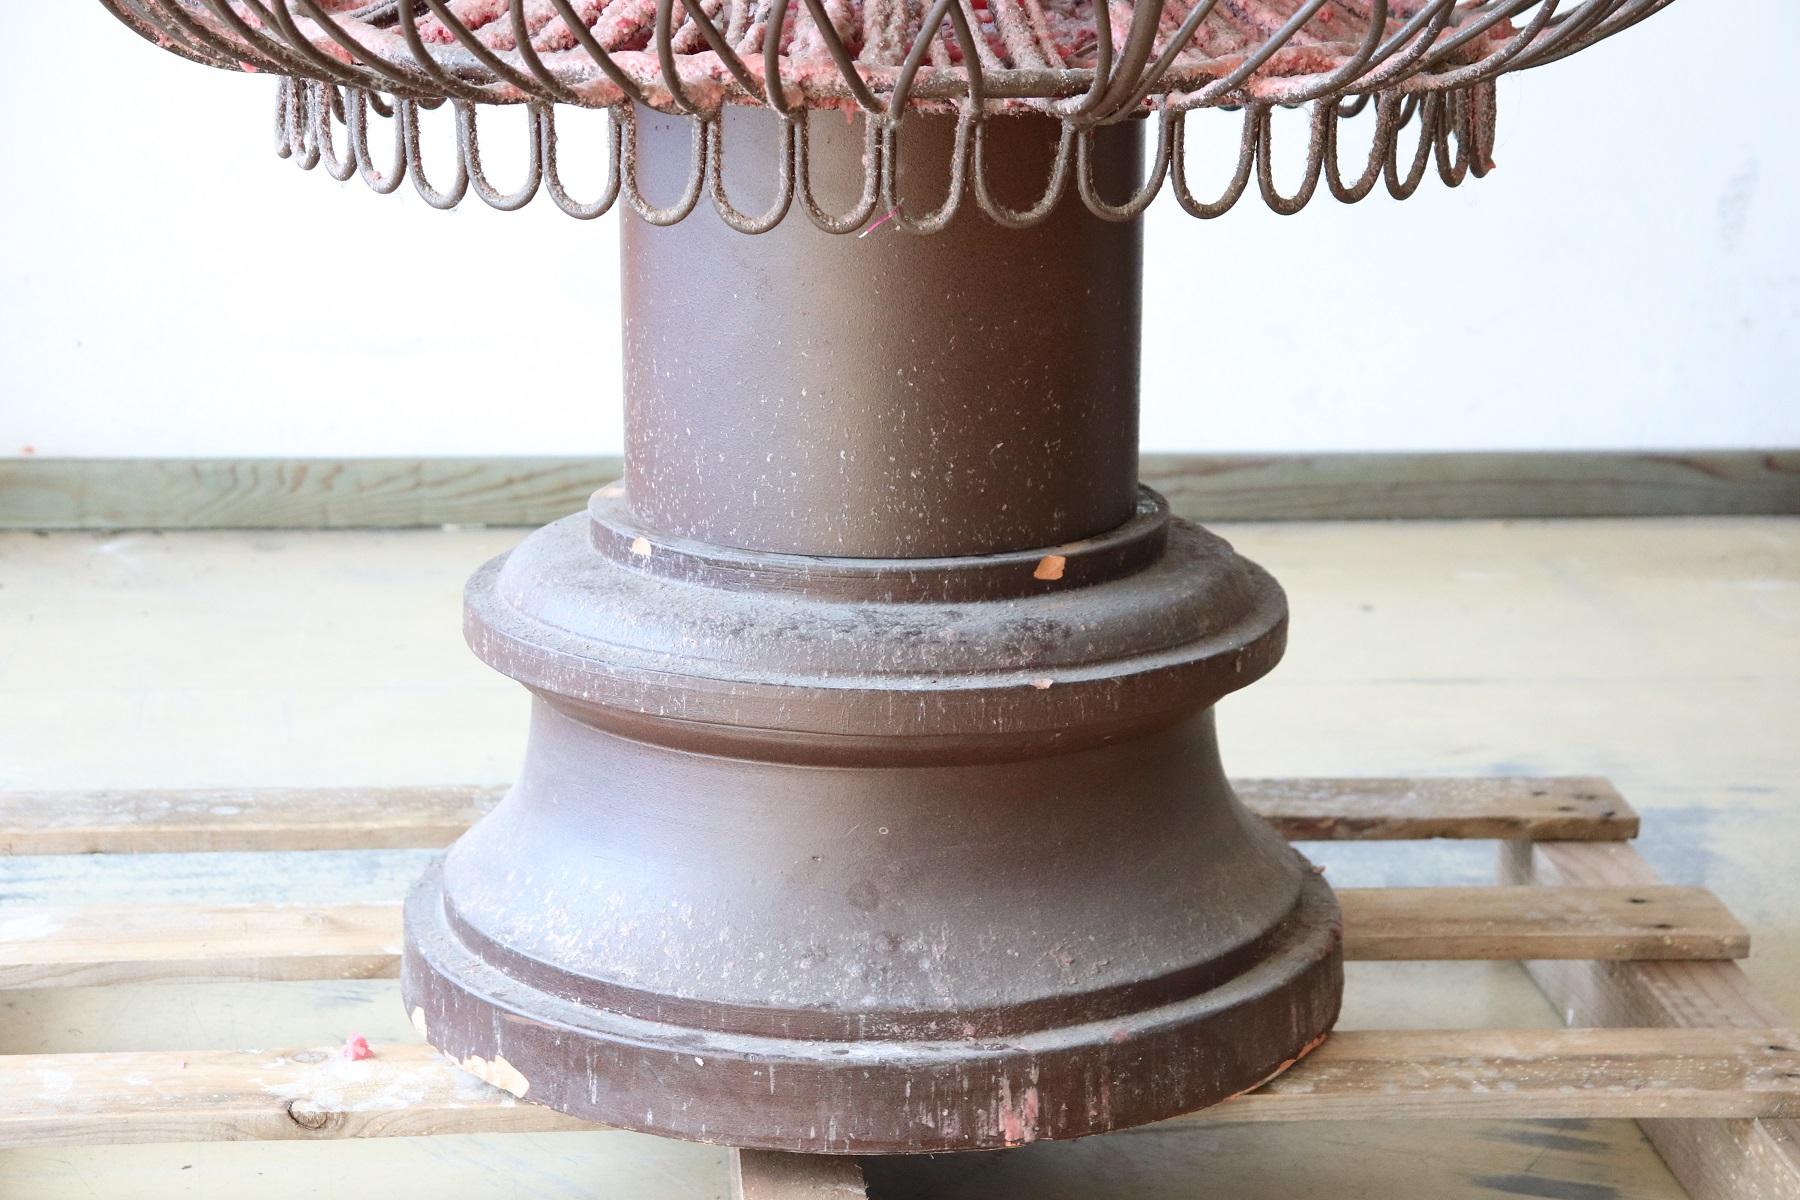 Rare large candelabrum in forged iron with 11 arms for 11 candles. The base is in terracotta and is revolving. In use for many years to illuminate the entrance of an ancient Italian home. The ancient wax used over the centuries still visible is very